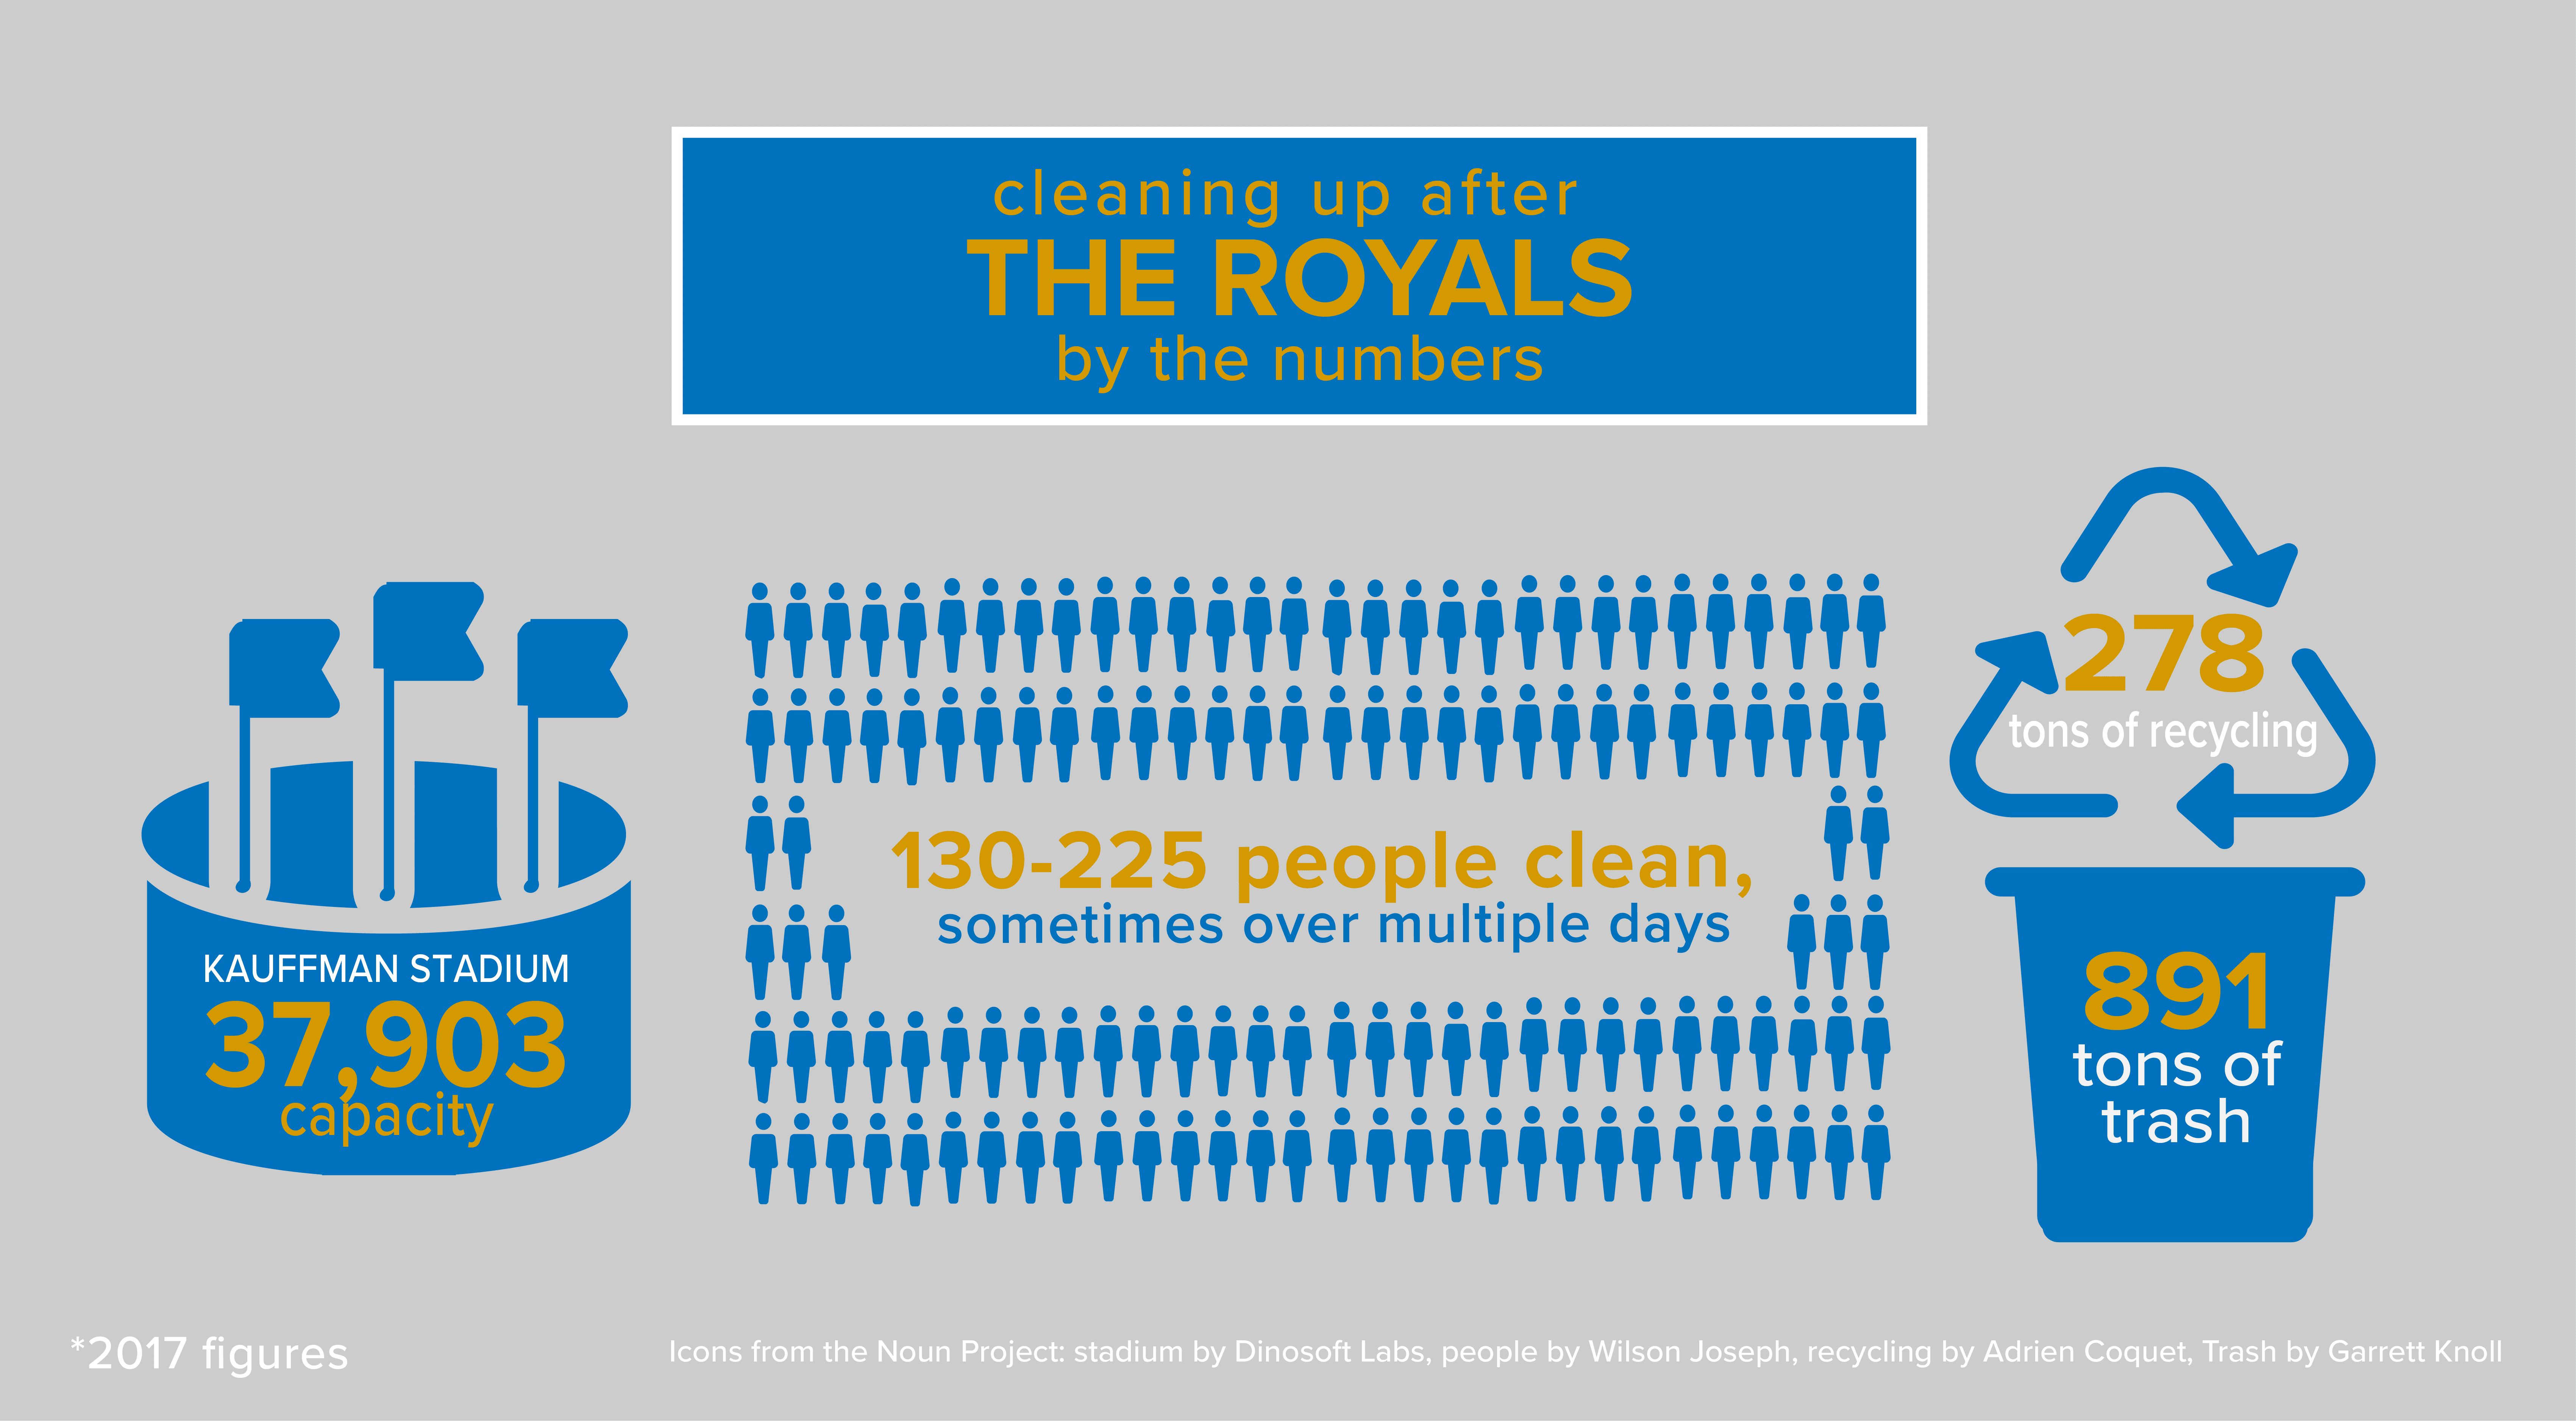 Cleaning up after The Royals Infographic showing that Kauffman Stadium has a 37,903 person capacity. 130-225 people clean, sometimes over multiple days. 278 tons of recycling and 891 tons of trash are collected. 2017 figures.